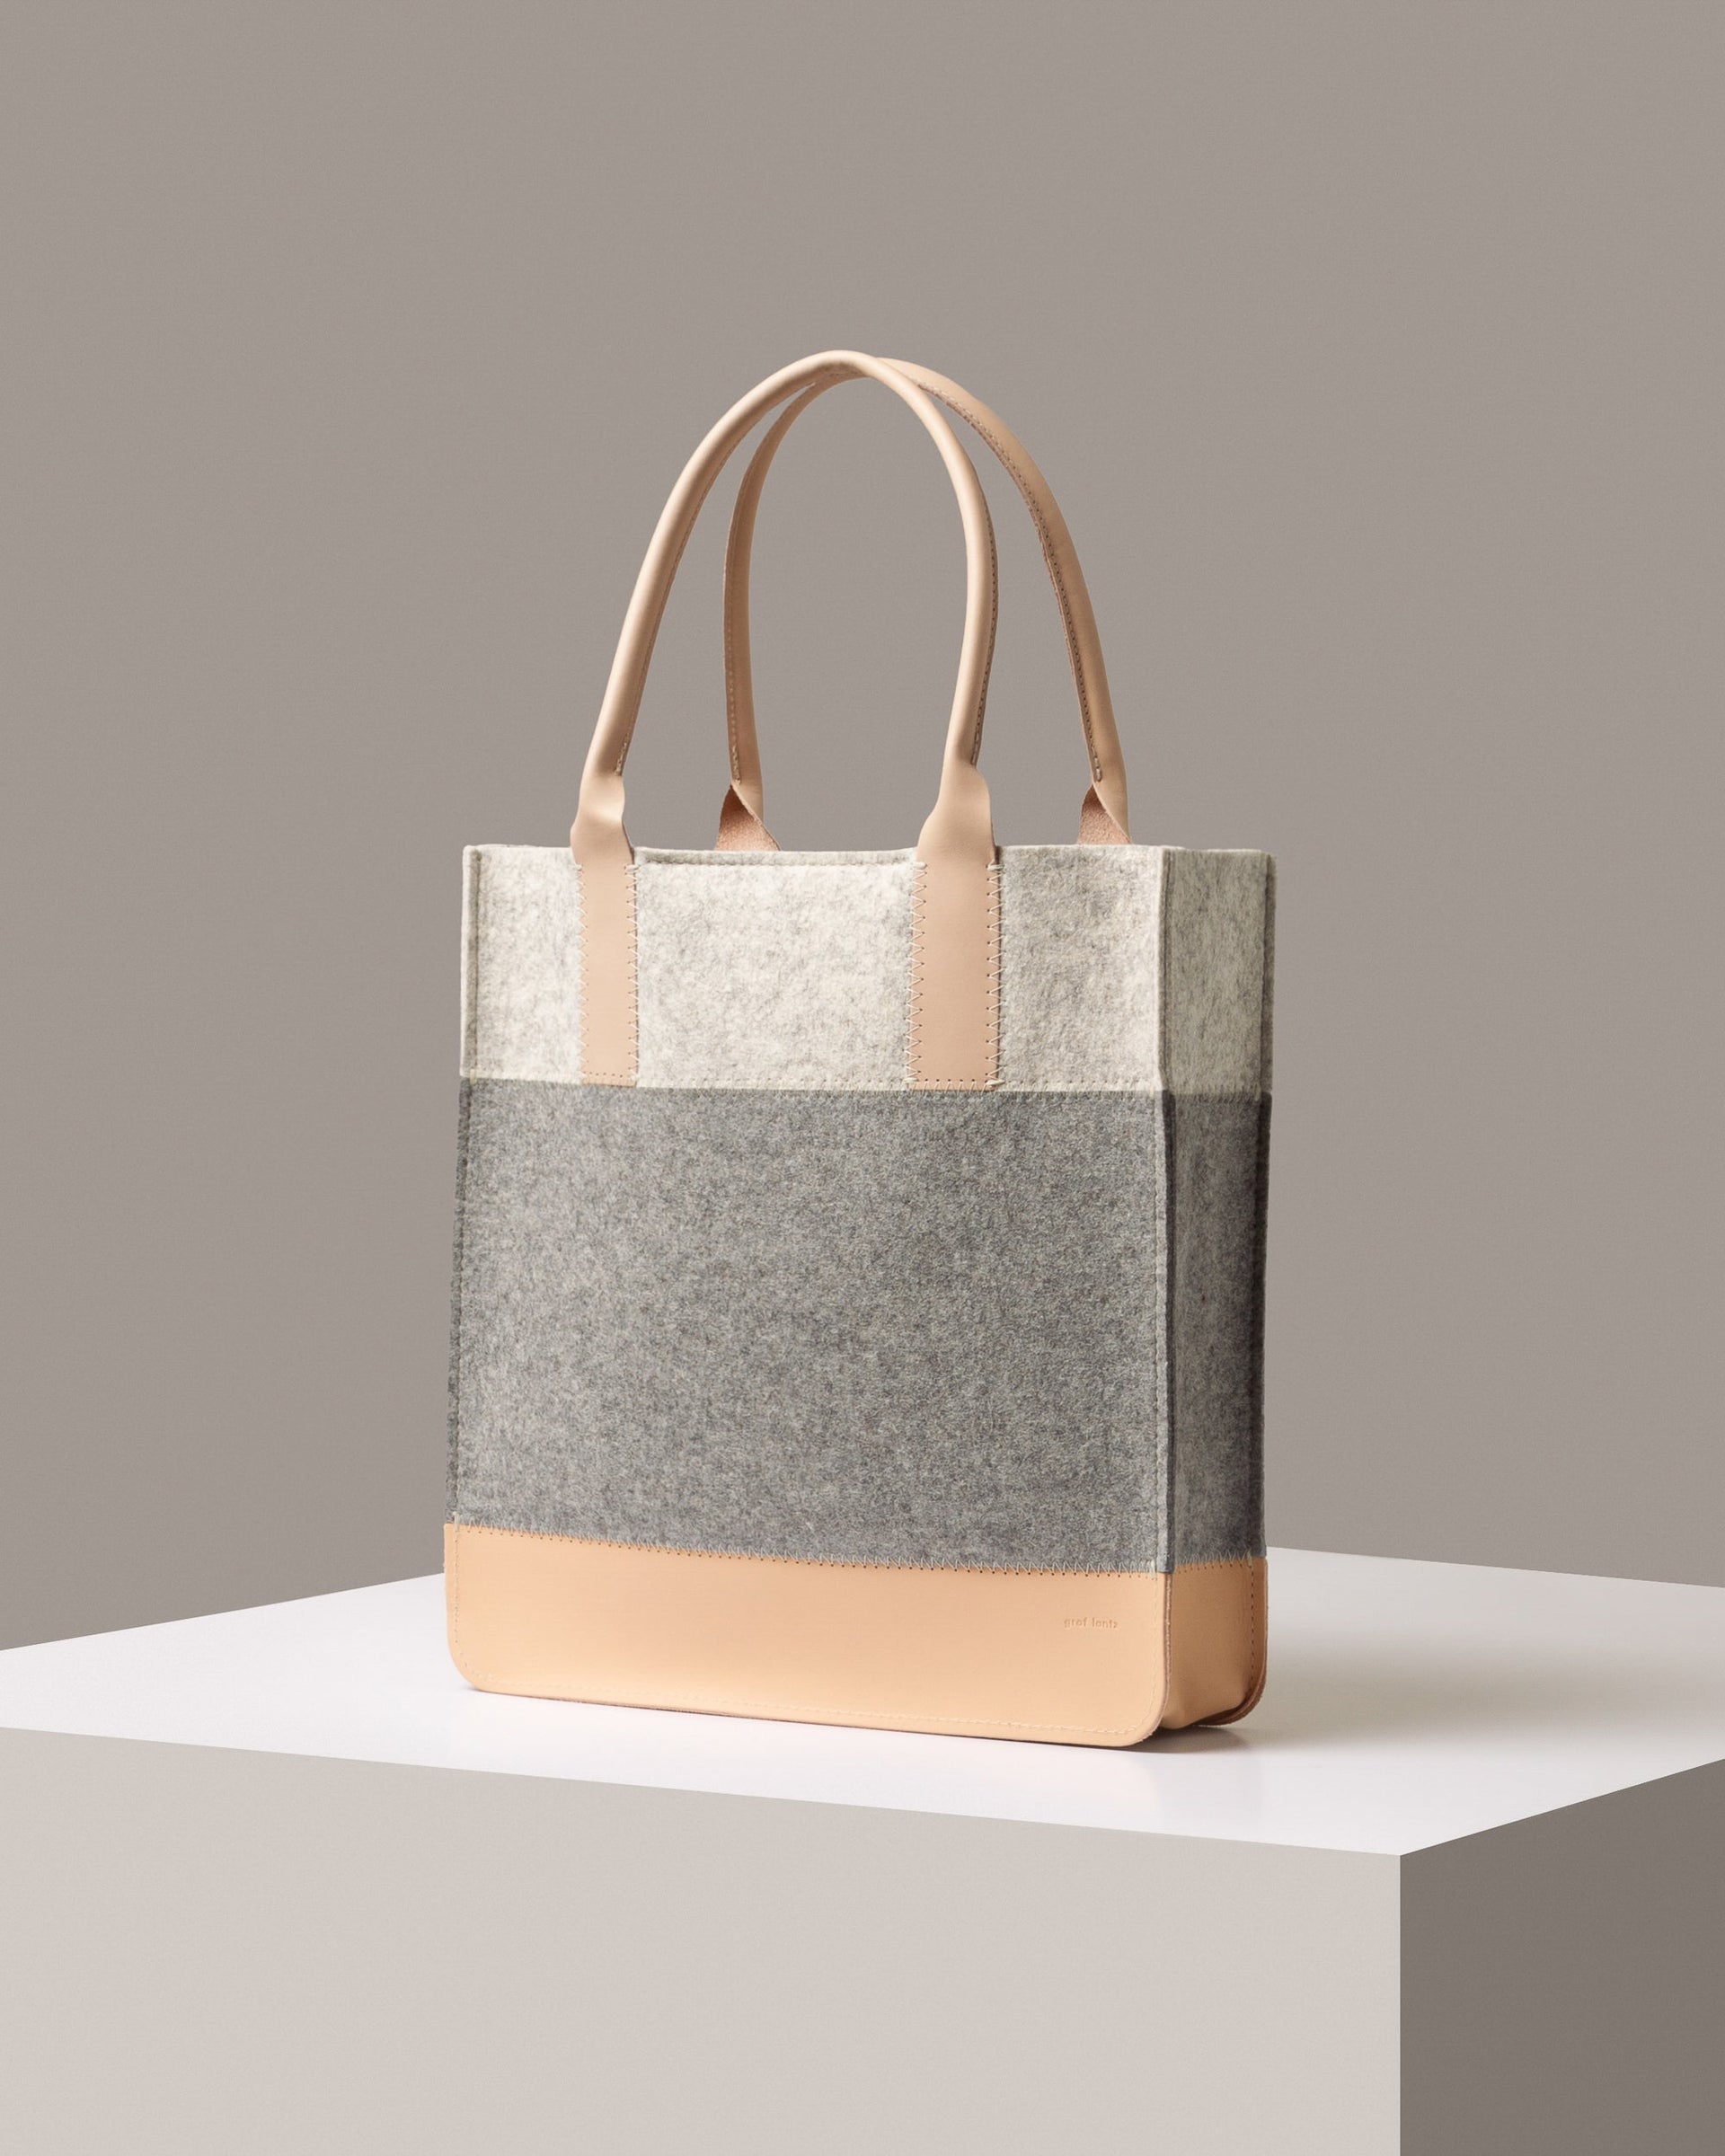 A stylish Jaunt Merino Wool Felt Tote bag in white, gray, and beige colors, displayed in a three-quarter view on a white base